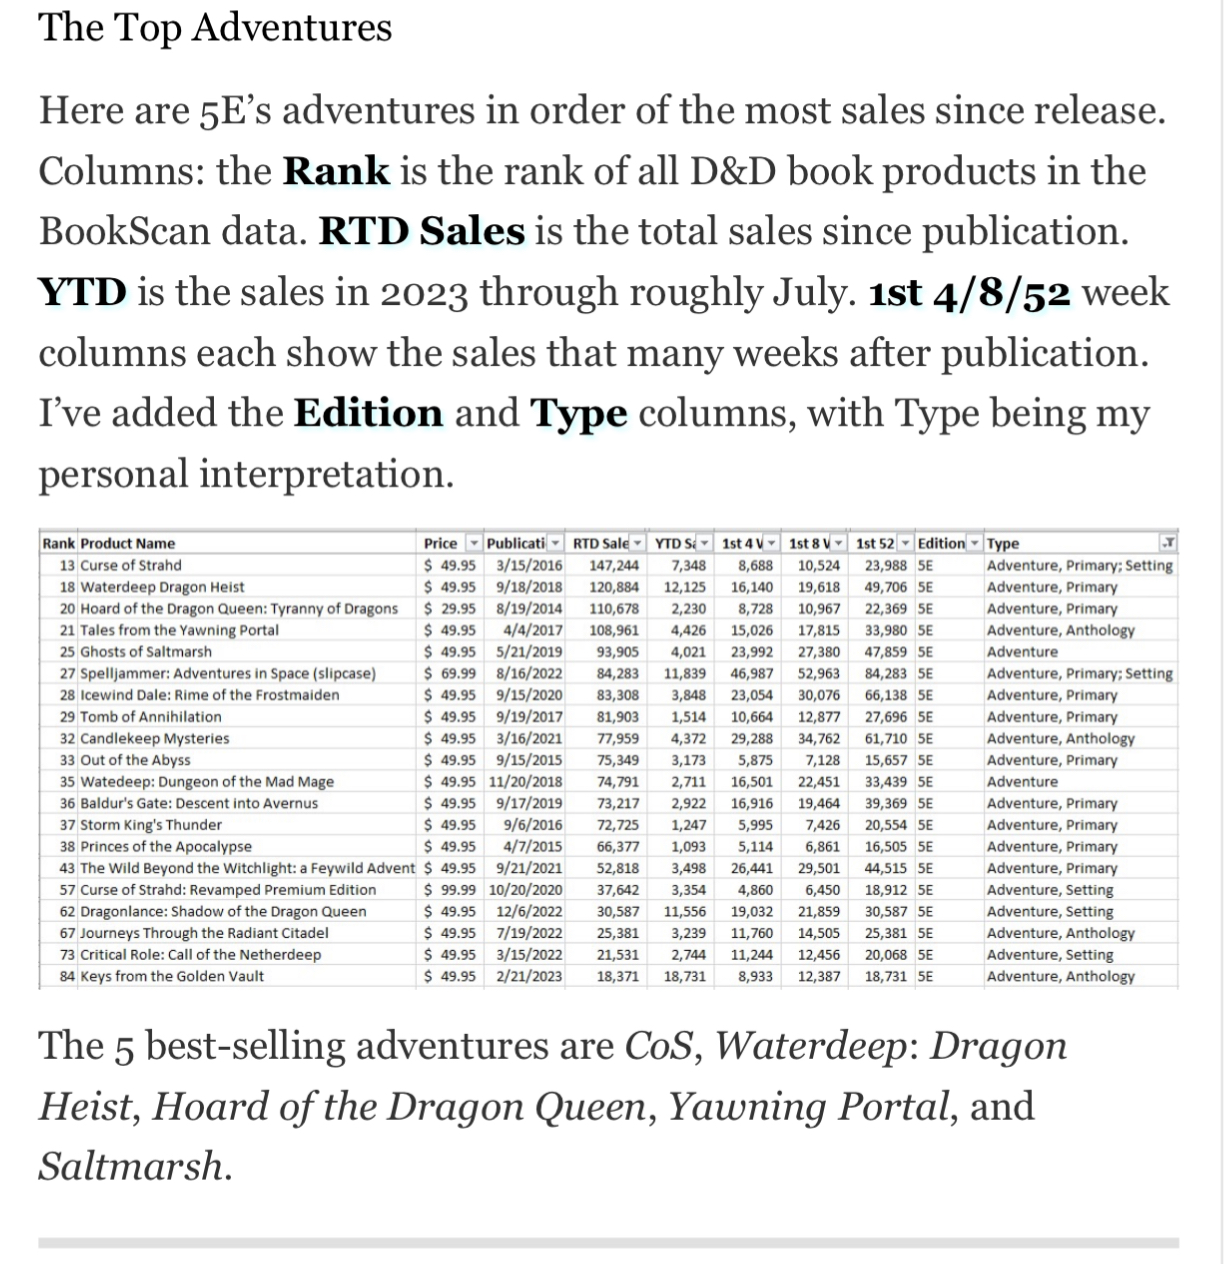 The Top Adventures Here are 5E's adventures in order of the most sales since release. Columns: the Rank is the rank of all D&D book products in the BookScan data. RTD Sales is the total sales since publication. YTD is the sales in 2023 through roughly July. 1st 4/8/52 week columns each show the sales that many weeks after publication. I've added the Edition and Type columns, with Type being my personal interpretation. Rank Product Name Price Publicati- RID Sale - VTDS- 1st4 V - 1st8 V - 1st 52 - Edition - Type 13 Curse of Strahd $ 49.95 3/15/2016 147.244 7,348 8.688 10,524 23.988 SE 18 Waterdeep Dragon Heist $ 49.95 9/18/2018 120.884 12,125 16,140 19,618 49,706 SE 20 Hoard of the Dragon Queen: Tyranny of Dragons $ 29.95 8/19/2014 110,678 2,230 8,728 10,967 22,369 SE 21 Tales from the Yawning Portal $ 49.95 4/4/2017 108,961 4,426 15,026 17,815 33,980 SE 25 Ghosts of Saltmarsh $ 49.95 5/21/2019 93.905 4.021 23,992 27,380 47,859 SE 27 Spelljammer: Adventures in Space (slipcase) § 69.99 8/16/2022 84,283 11,839 46,987 52,963 84,283 SE 28 Icewind Dale: Rime of the Frostmaiden § 49.95 9/15/2020 83,308 3,848 23,054 30.076 66,138 SE 29 Tomb of Annihilation § 49.95 9/19/2017 81.903 1,514 10,664 12.877 27,696 SE 32 Candlekeep Mysteries § 49.95 3/16/2021 77,959 4,372 29,288 34,762 61,710 SE 33 Out of the Abyss $ 49.95 9/15/2015 75,349 3,173 5,875 7,128 15,657 SE 35 Watedeep: Dungeon of the Mad Mage $ 49.95 11/20/2018 74.791 2,711 16,501 22,451 33,439 SE 36 Baldur's Gate: Descent into Avernus $ 49.95 9/17/2019 73,217 2,922 16,916 19,464 39,369 SE 37 Storm King's Thunder § 49.95 9/6/2016 72,725 1.247 5,995 7,426 20.554 SE 38 Princes of the Apocalypse § 49.95 4/7/2015 66,377 1,093 5,114 6,861 16.505 SE 43 The Wild Beyond the Witchlight: a Feywild Advent $ 49.95 9/21/2021 52.818 3,498 26,441 29.501 44.515 SE 57 Curse of Strahd: Revamped Premium Edition § 99.99 10/20/2020 37,642 3,354 4,860 6,450 18,912 5E 62 Dragonlance: Shadow of the Dragon Queen $ 49.95 12/6/2022 30,587 11,556 19,032 21,859 30,587 SE 67 Journeys Through the Radiant Citadel $ 49.95 7/19/2022 25,381 3,239 11,760 14.505 25,381 SE 73 Critical Role: Call of the Netherdeep § 49.95 3/15/2022 21,531 2.744 11.244 12.456 20.068 SE 84 Keys from the Golden Vault $ 49.95 2/21/2023 18,371 18,731 8,933 12,387 18,731 SE Adventure, Primary; Setting Adventure, Primary Adventure, Primary Adventure, Anthology Adventure Adventure, Primary; Setting Adventure, Primary Adventure, Primary Adventure, Anthology Adventure, Primary Adventure Adventure, Primary Adventure, Primary Adventure, Primary Adventure, Primary Adventure, Setting Adventure, Setting Adventure, Anthology Adventure, Setting Adventure, Anthology The 5 best-selling adventures are CoS, Waterdeep: Dragon Heist, Hoard of the Dragon Queen, Yawning Portal, and Saltmarsh.